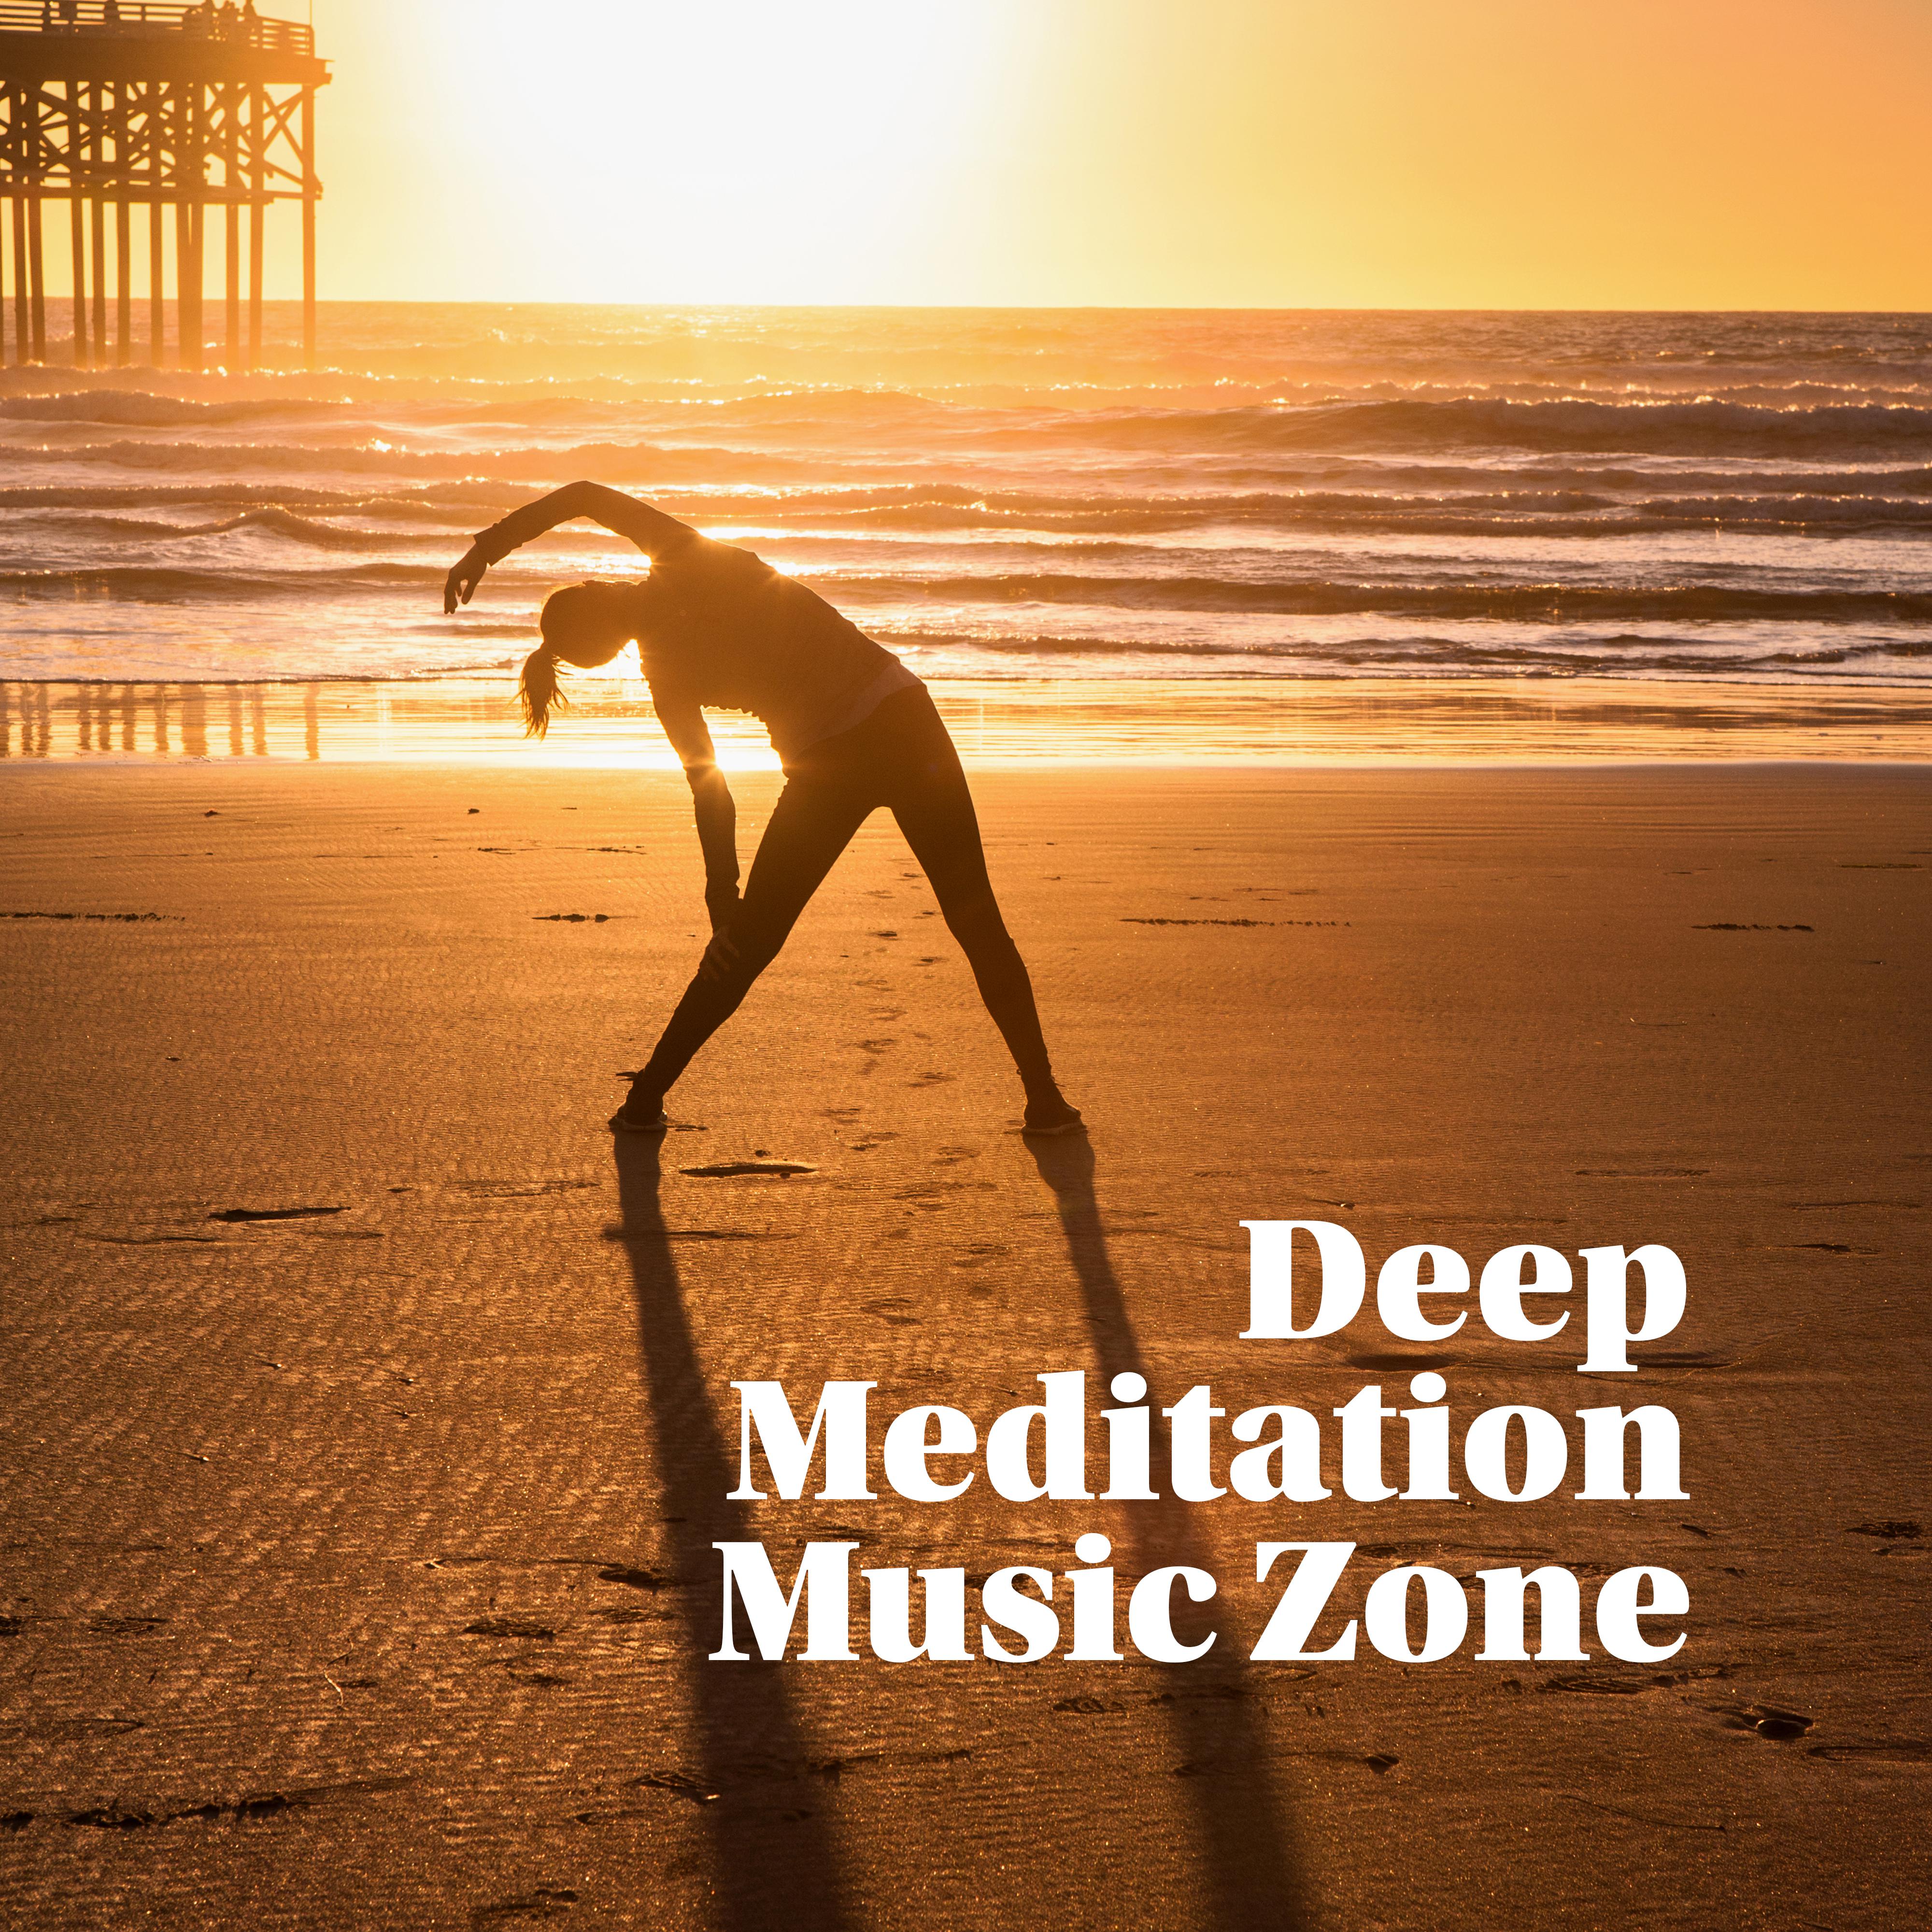 Deep Meditation Music Zone: New Age Music for Relaxation, Yoga Essentials, Harmonic Music for Meditation, Inner Balance, Yoga Meditation, Relaxation Zen Collection 2019